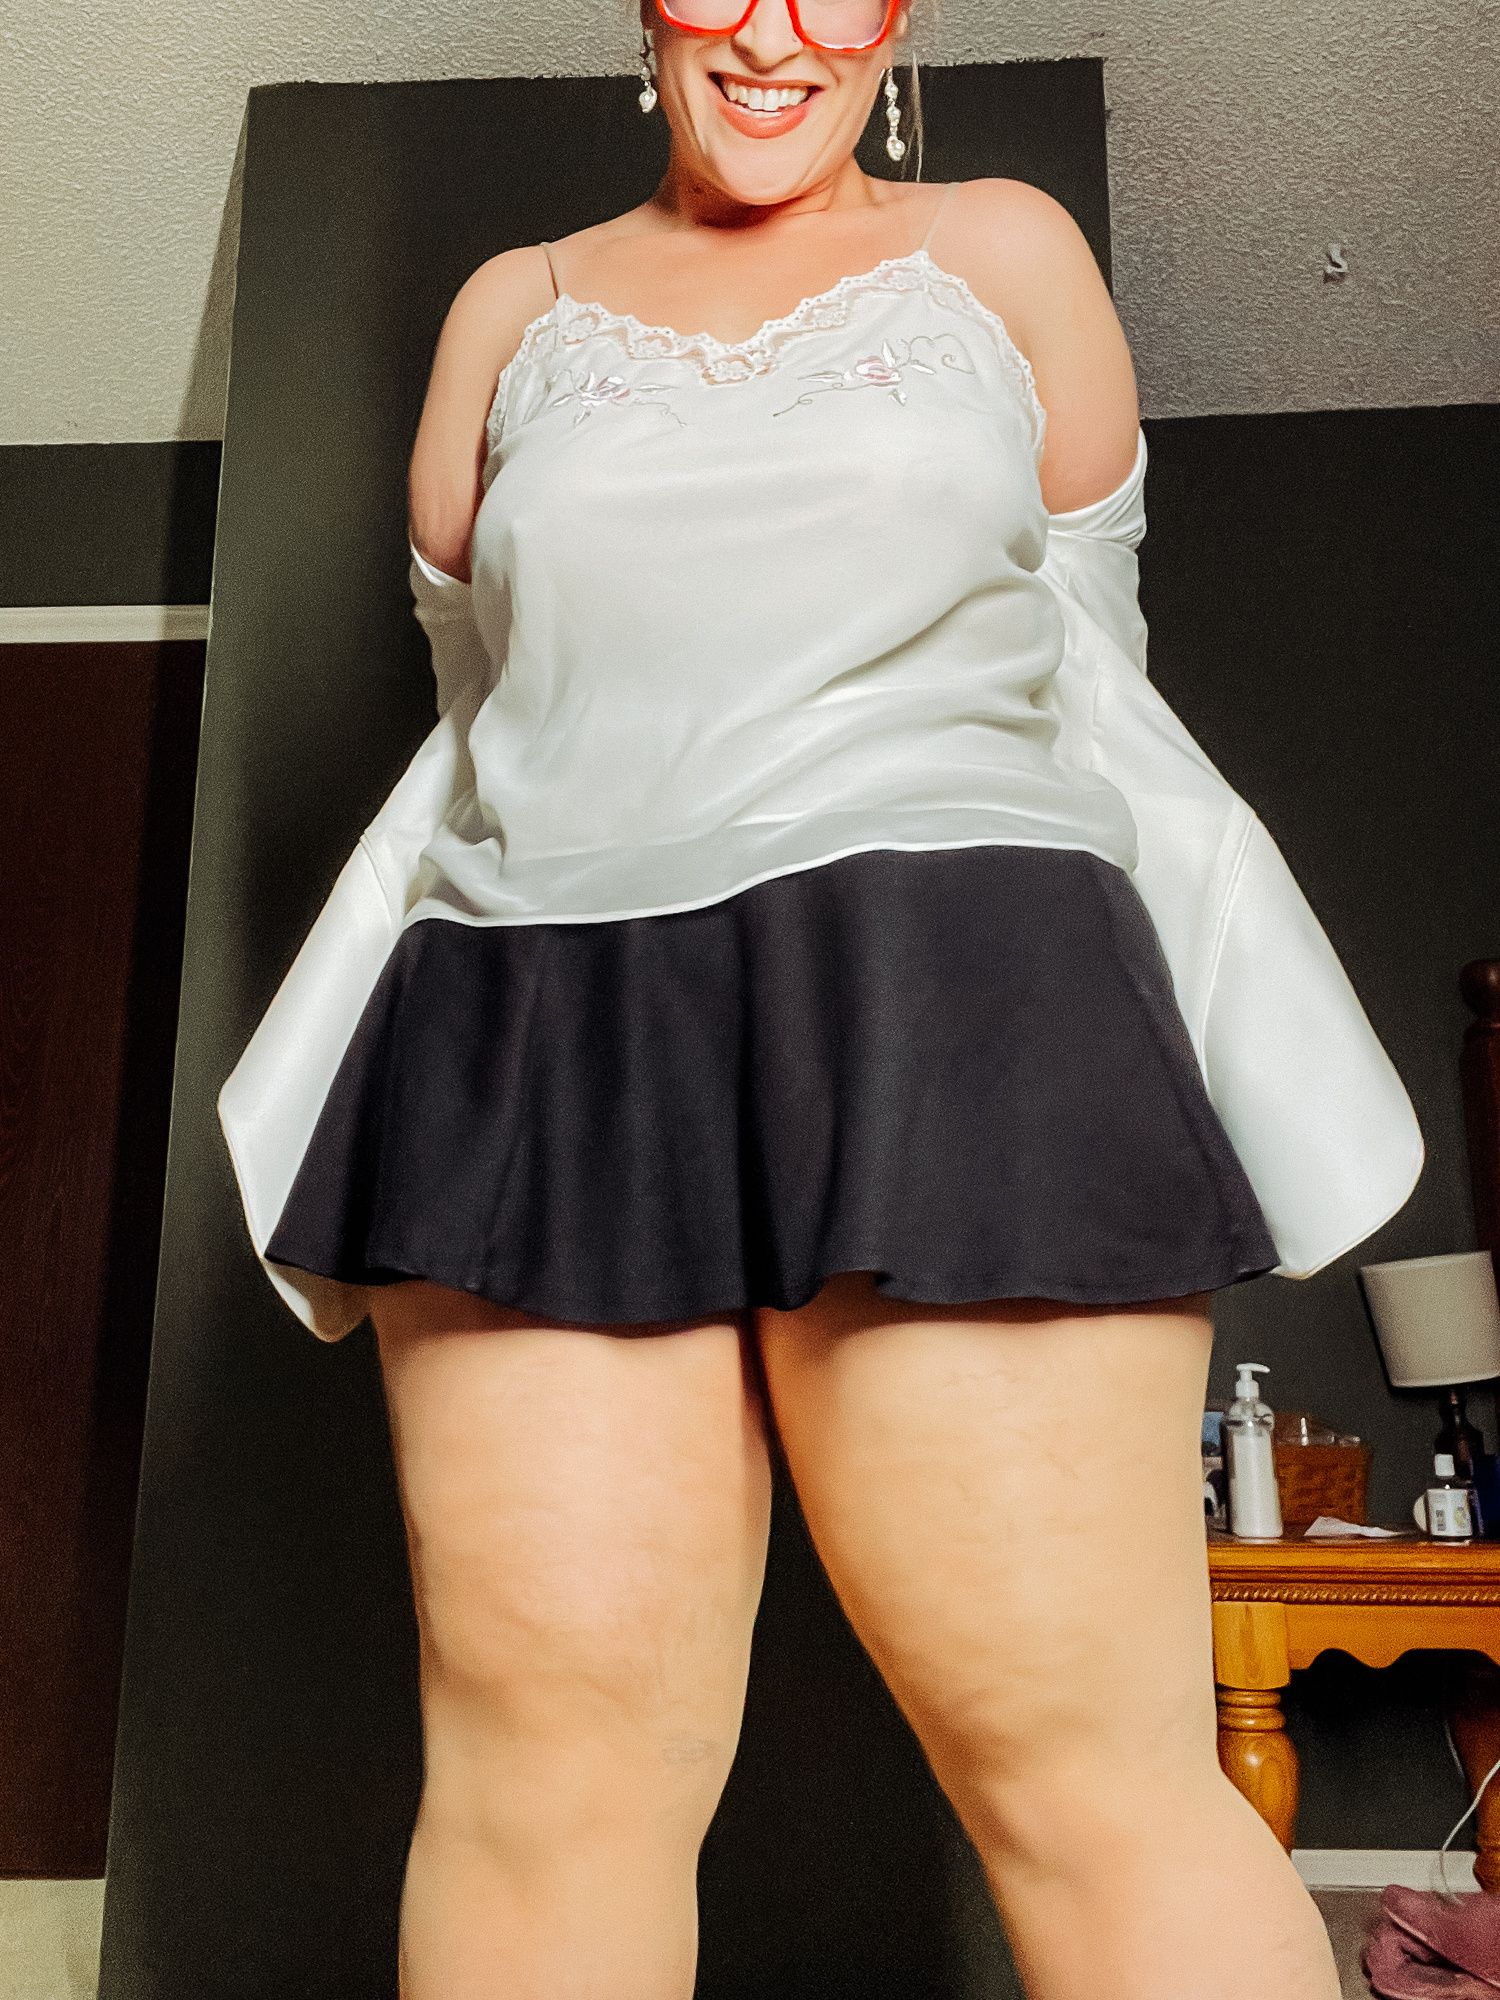 BBW in a mini black skirt and nylons with heels Big Thighs #22